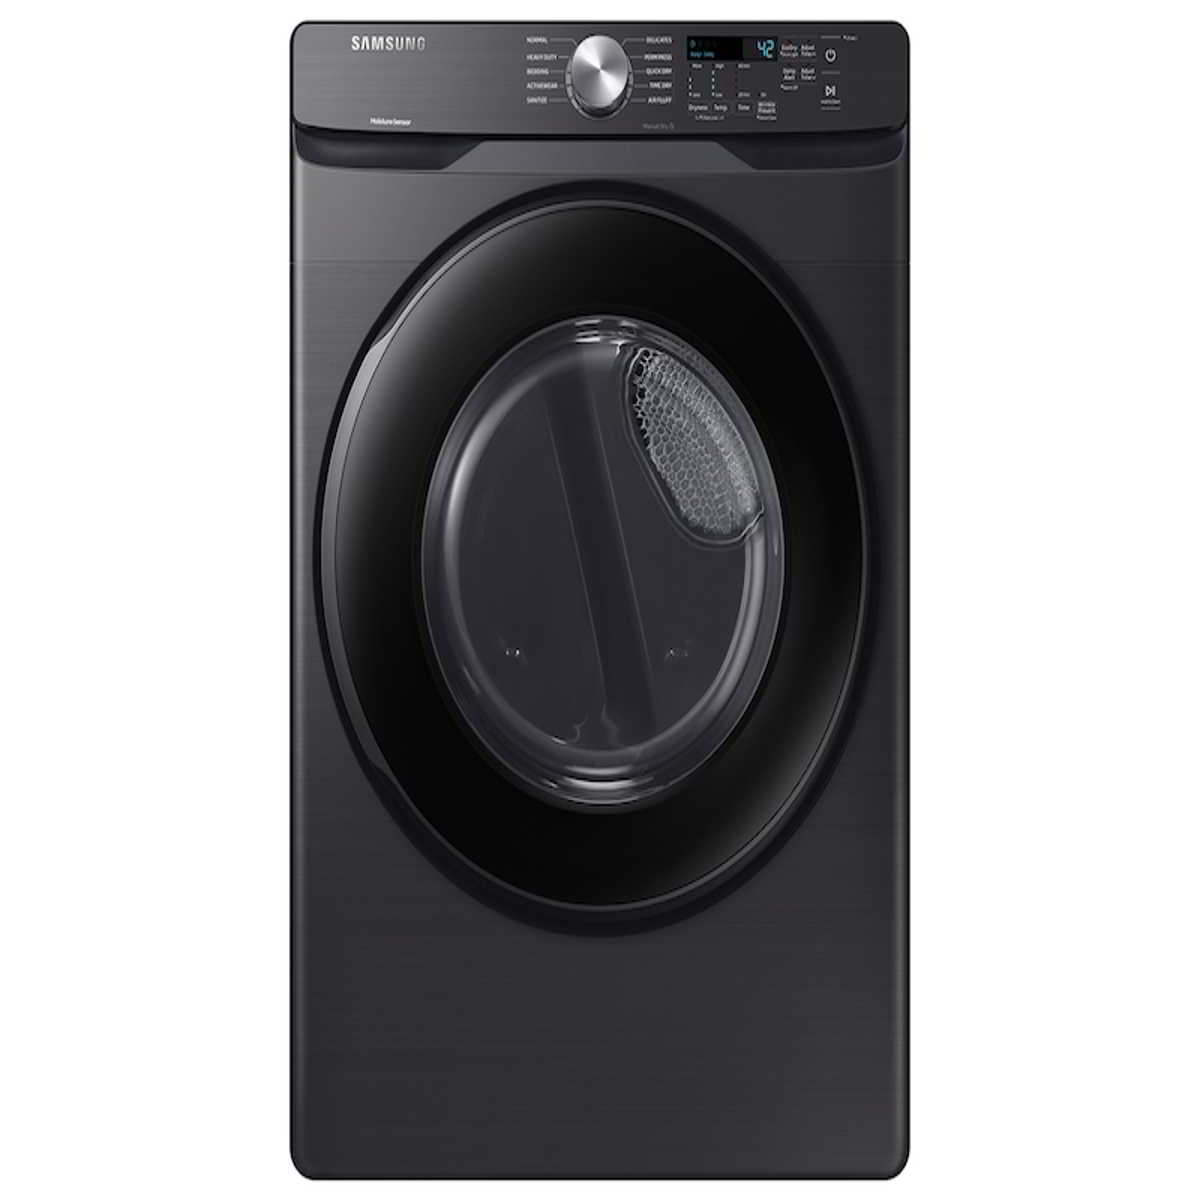 Samsung front load dryer not heating